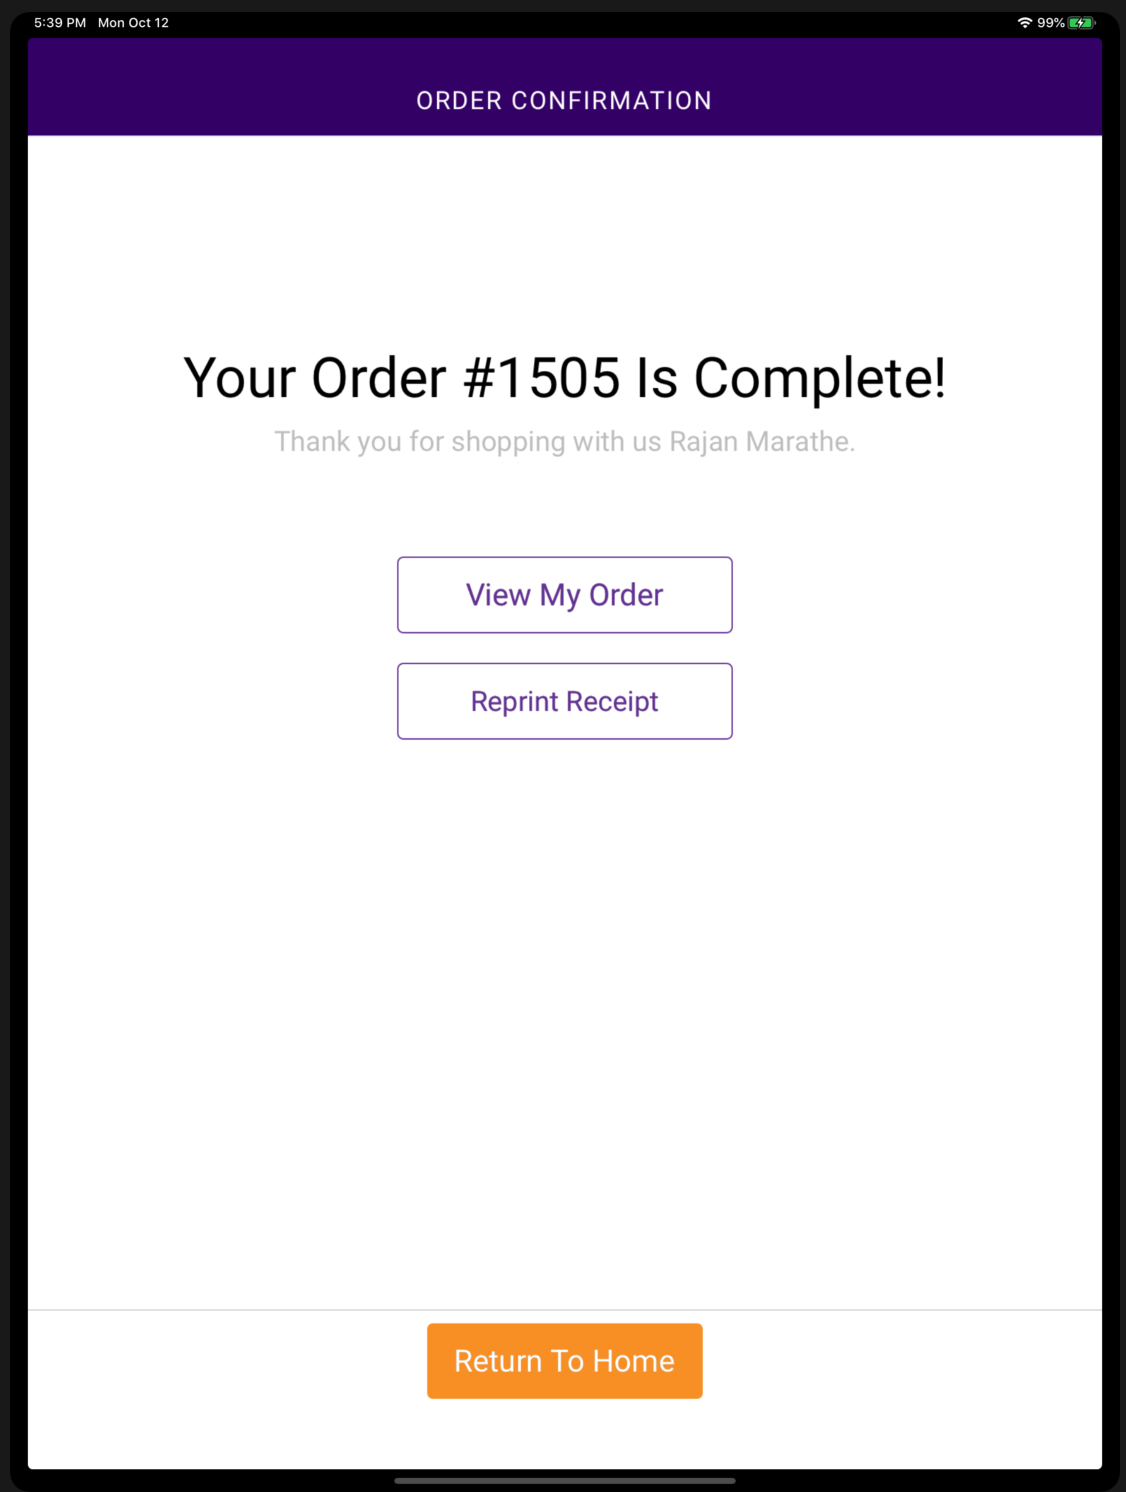 The final order confirmation page of the checkout